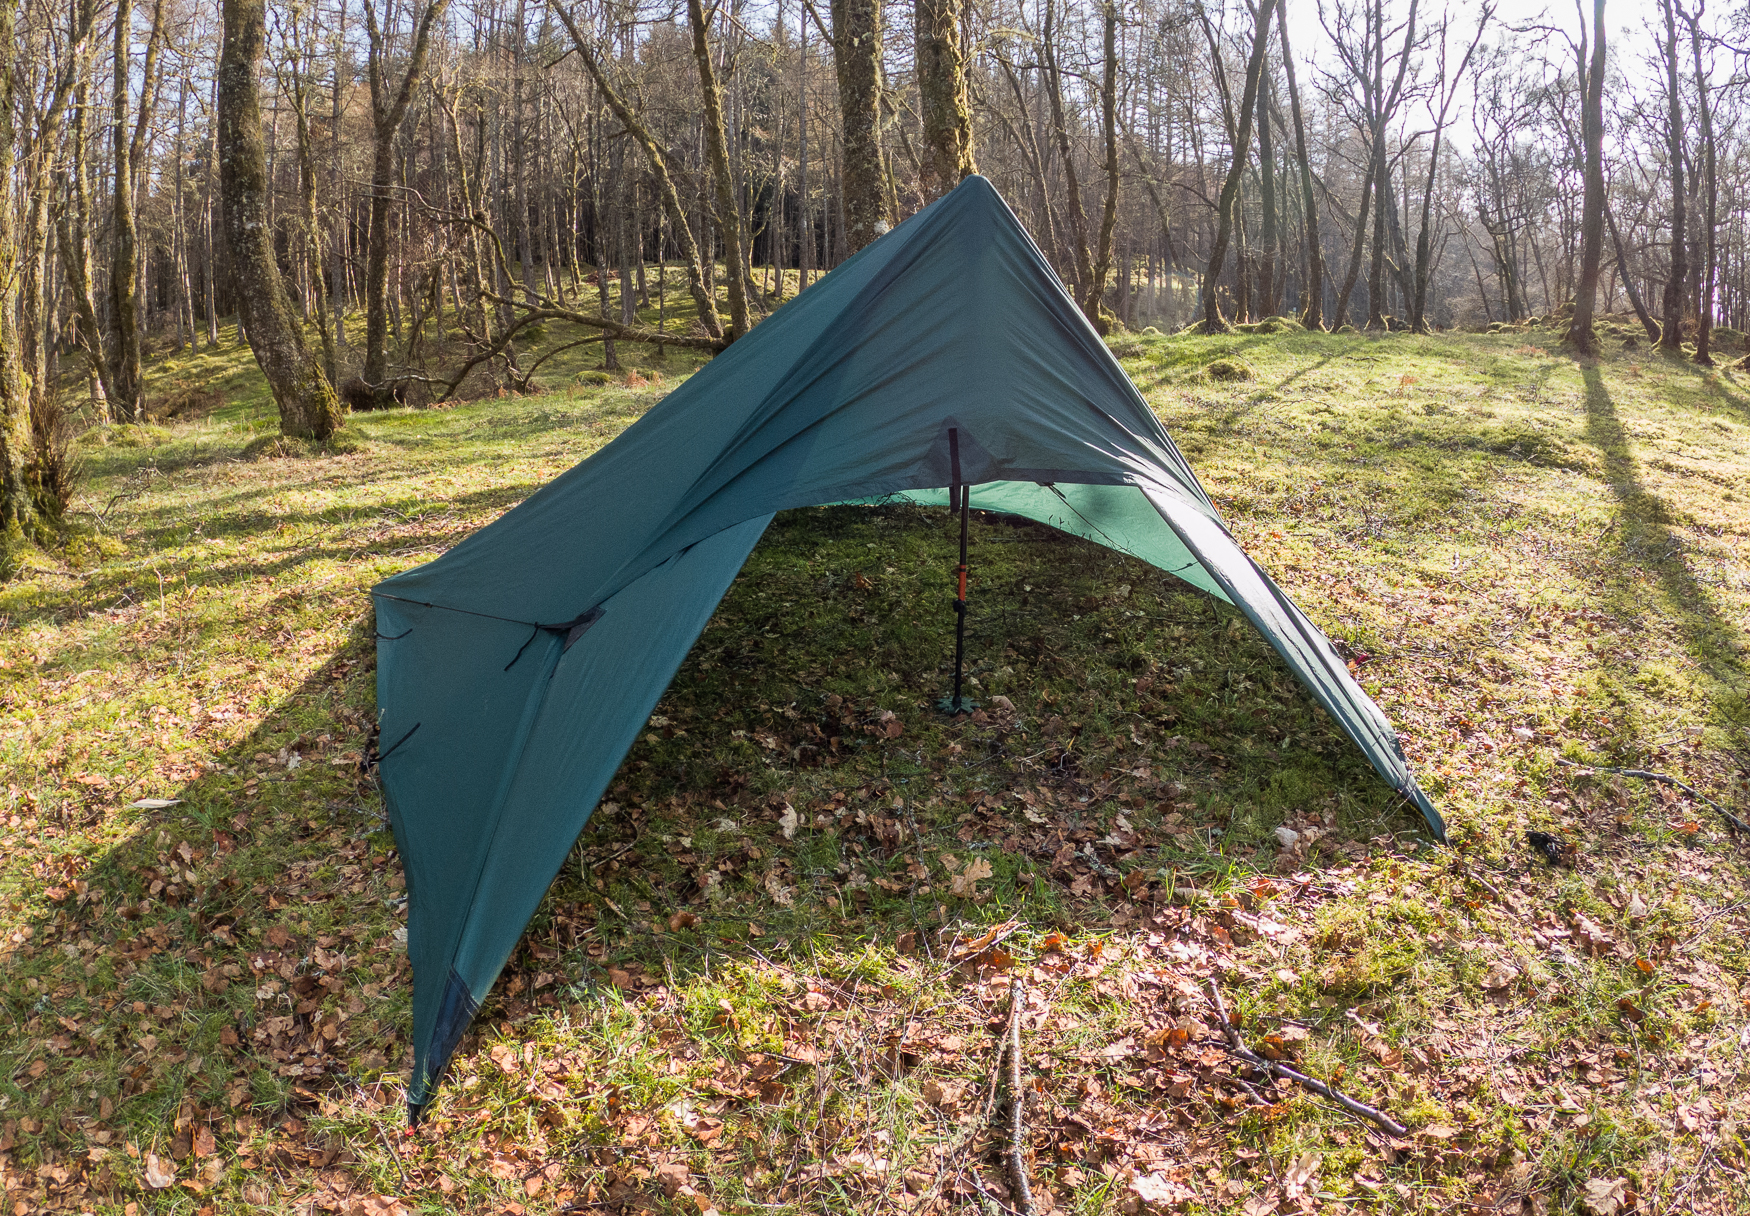 T Mos Geld lenende 5 creative ways to use your tarp to stay dry when camping this spring - The  Manual